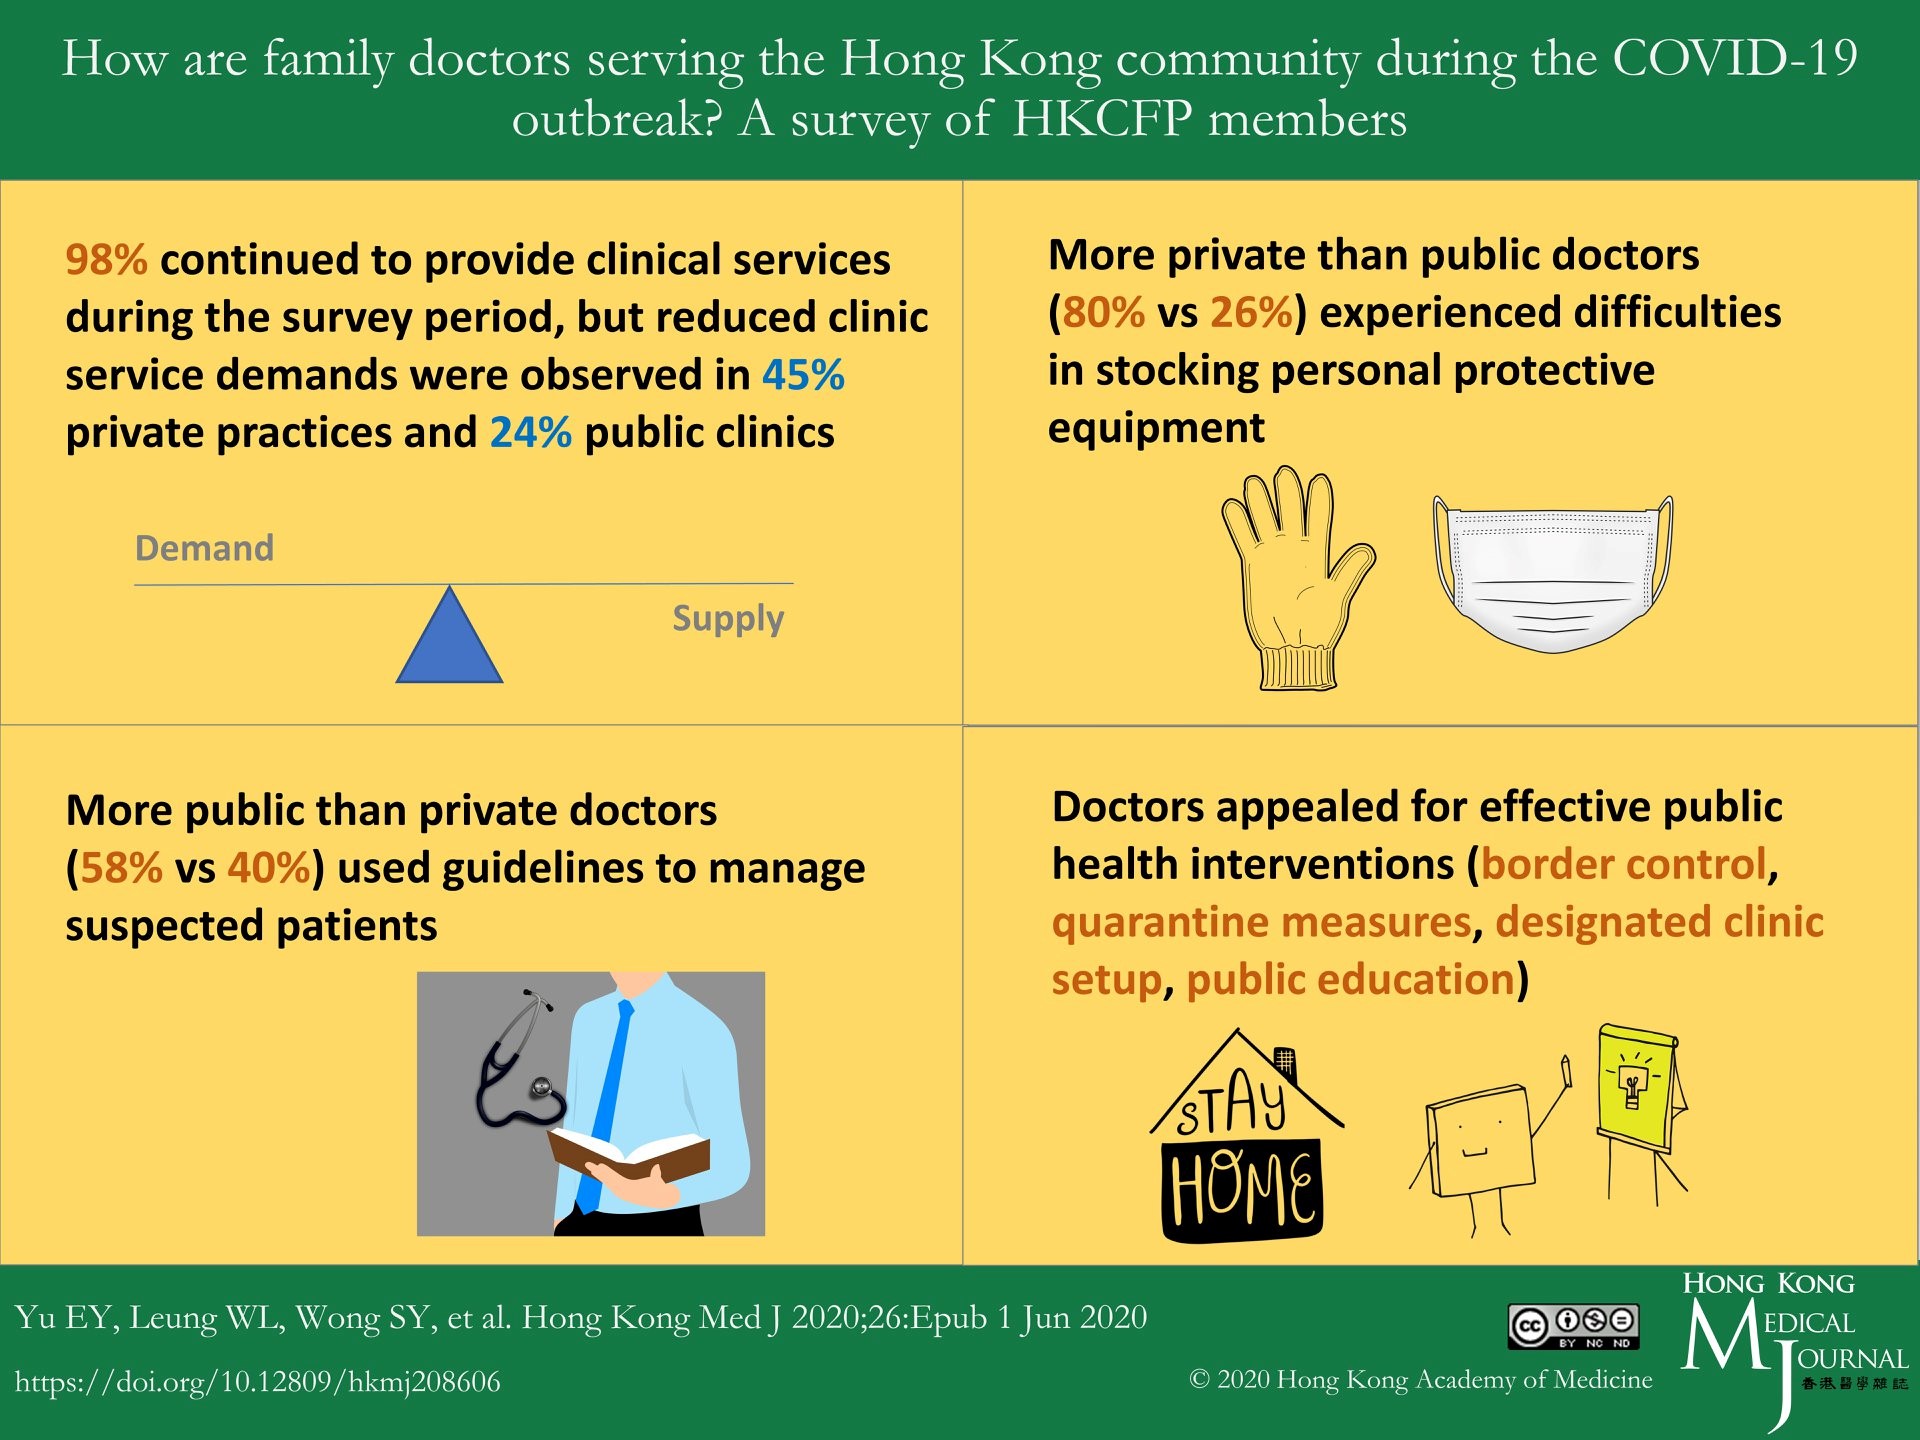 How are family doctors serving the Hong Kong community during the COVID-19 outbreak? A survey of HKCFP members